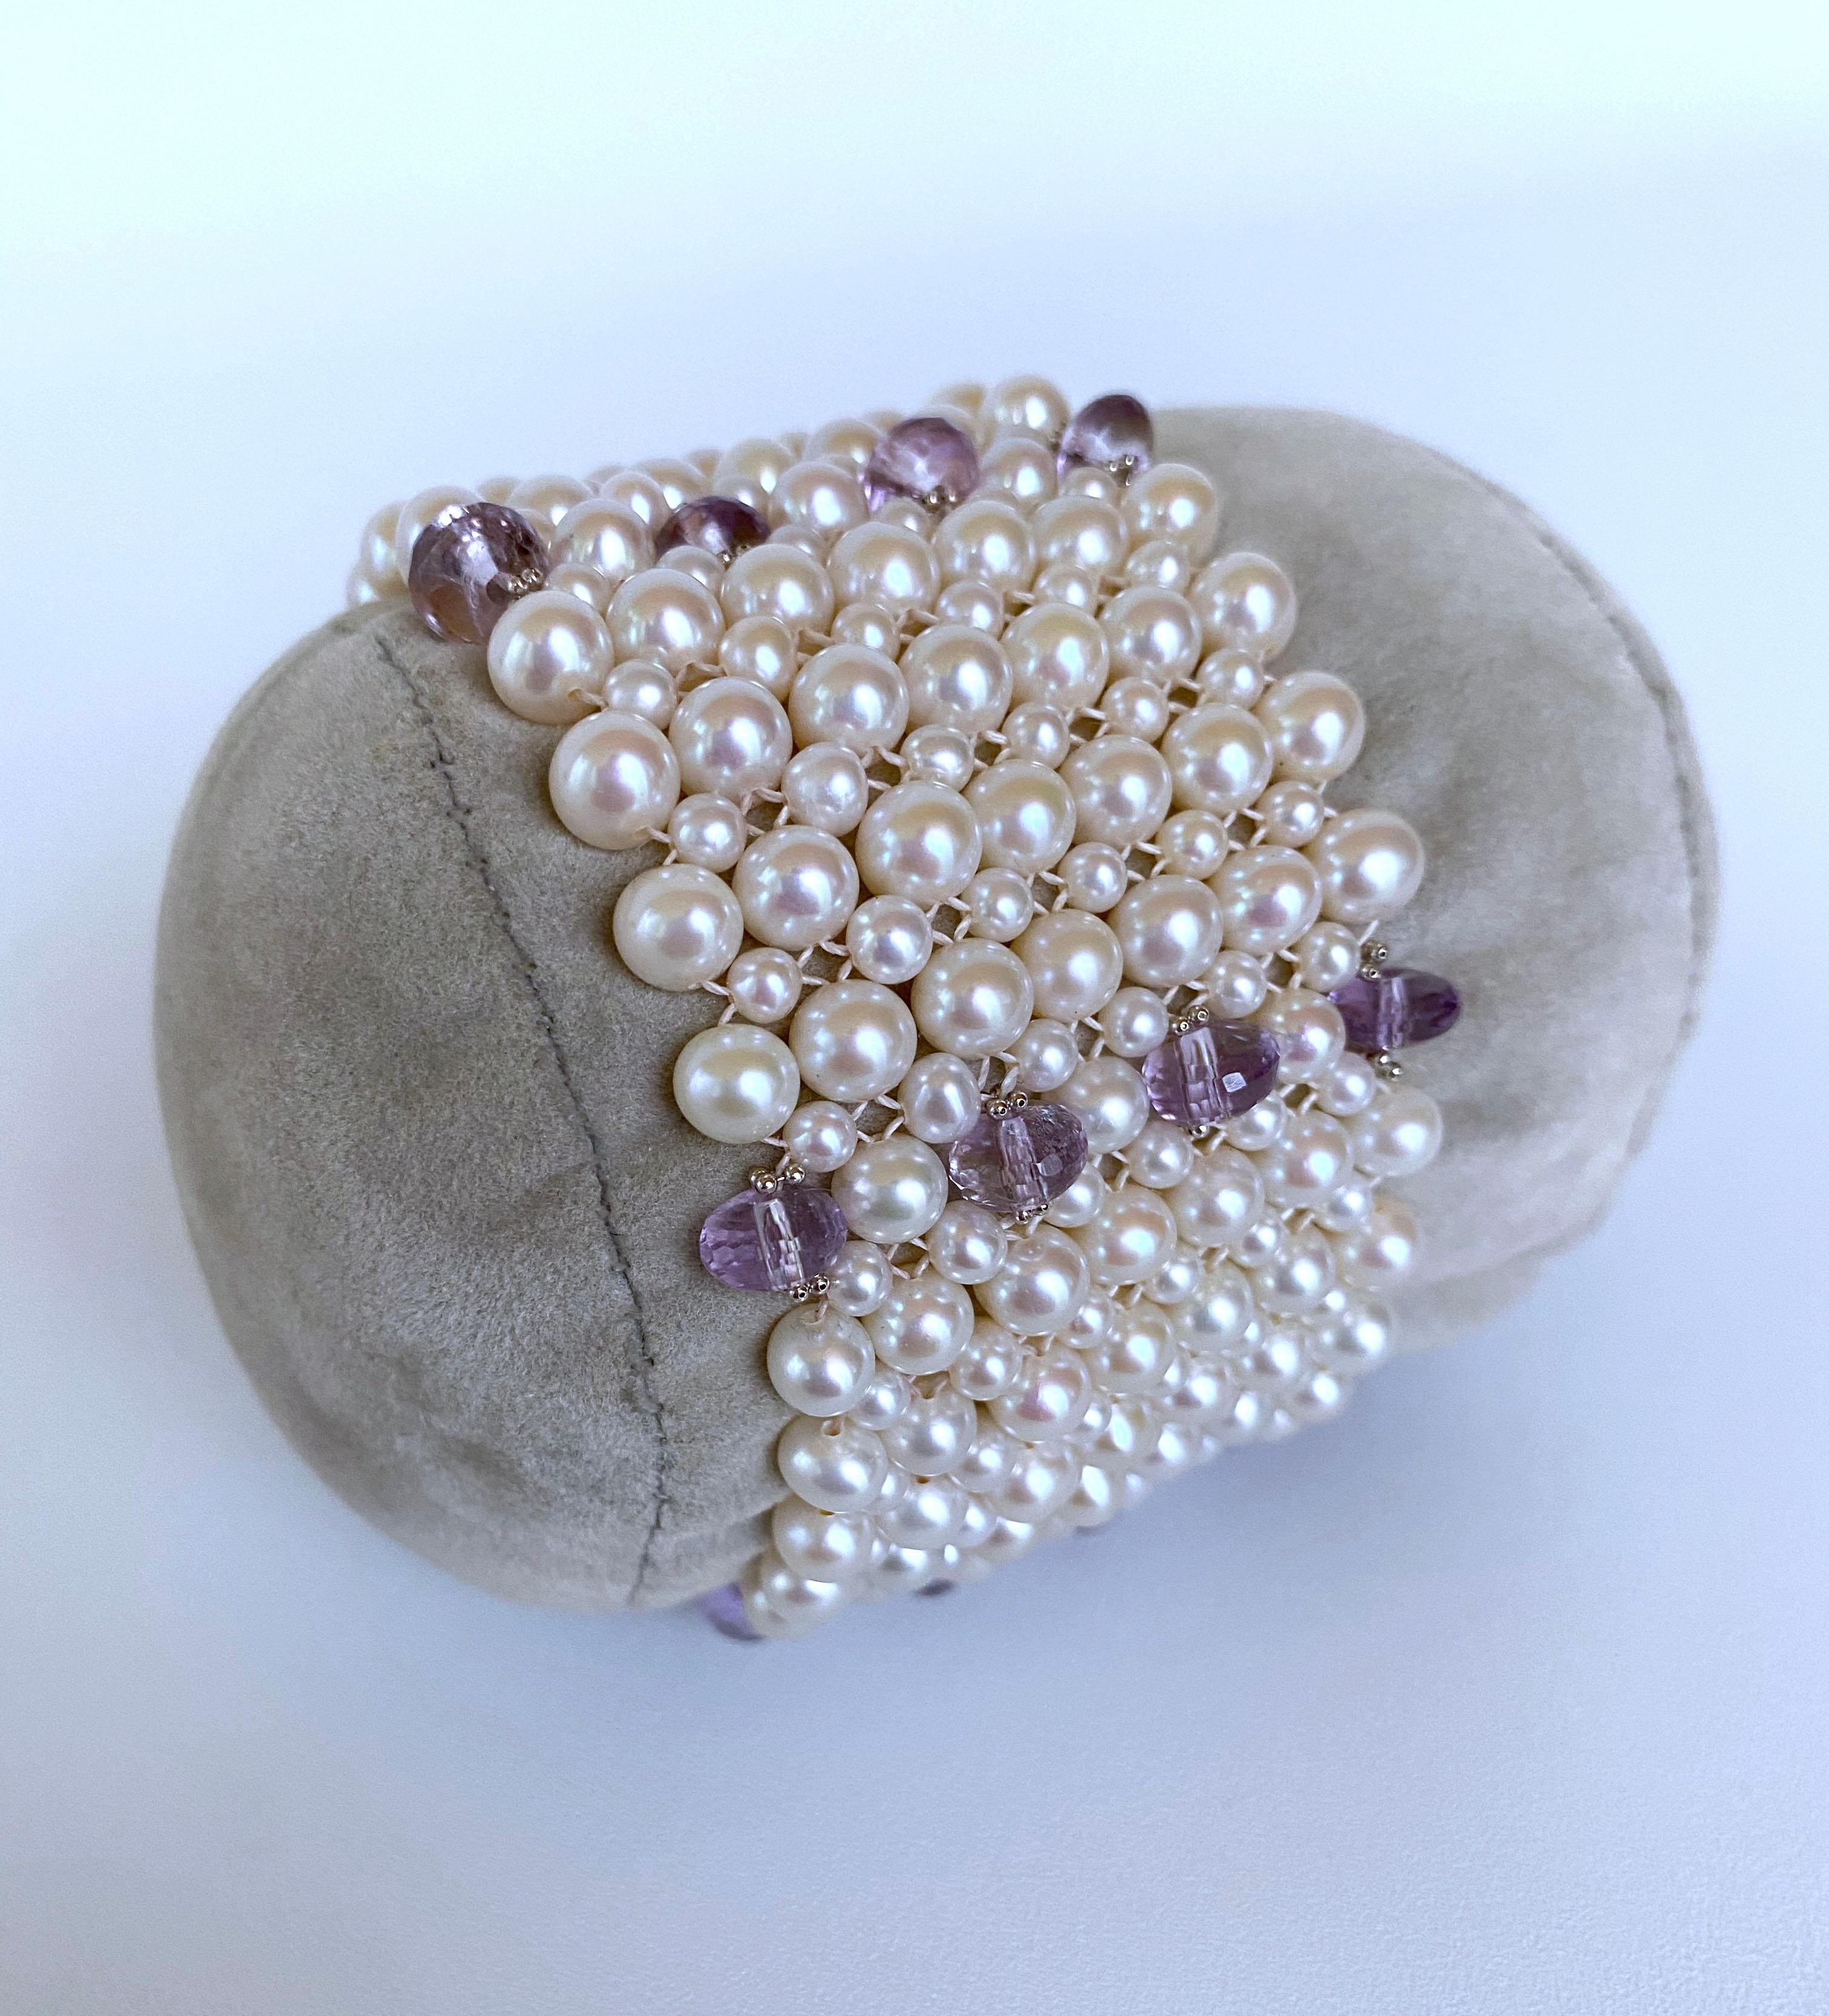 Artisan Marina J. Amethyst and Pearl Bracelet with Vintage Centerpiece Clasp and Rhodium For Sale